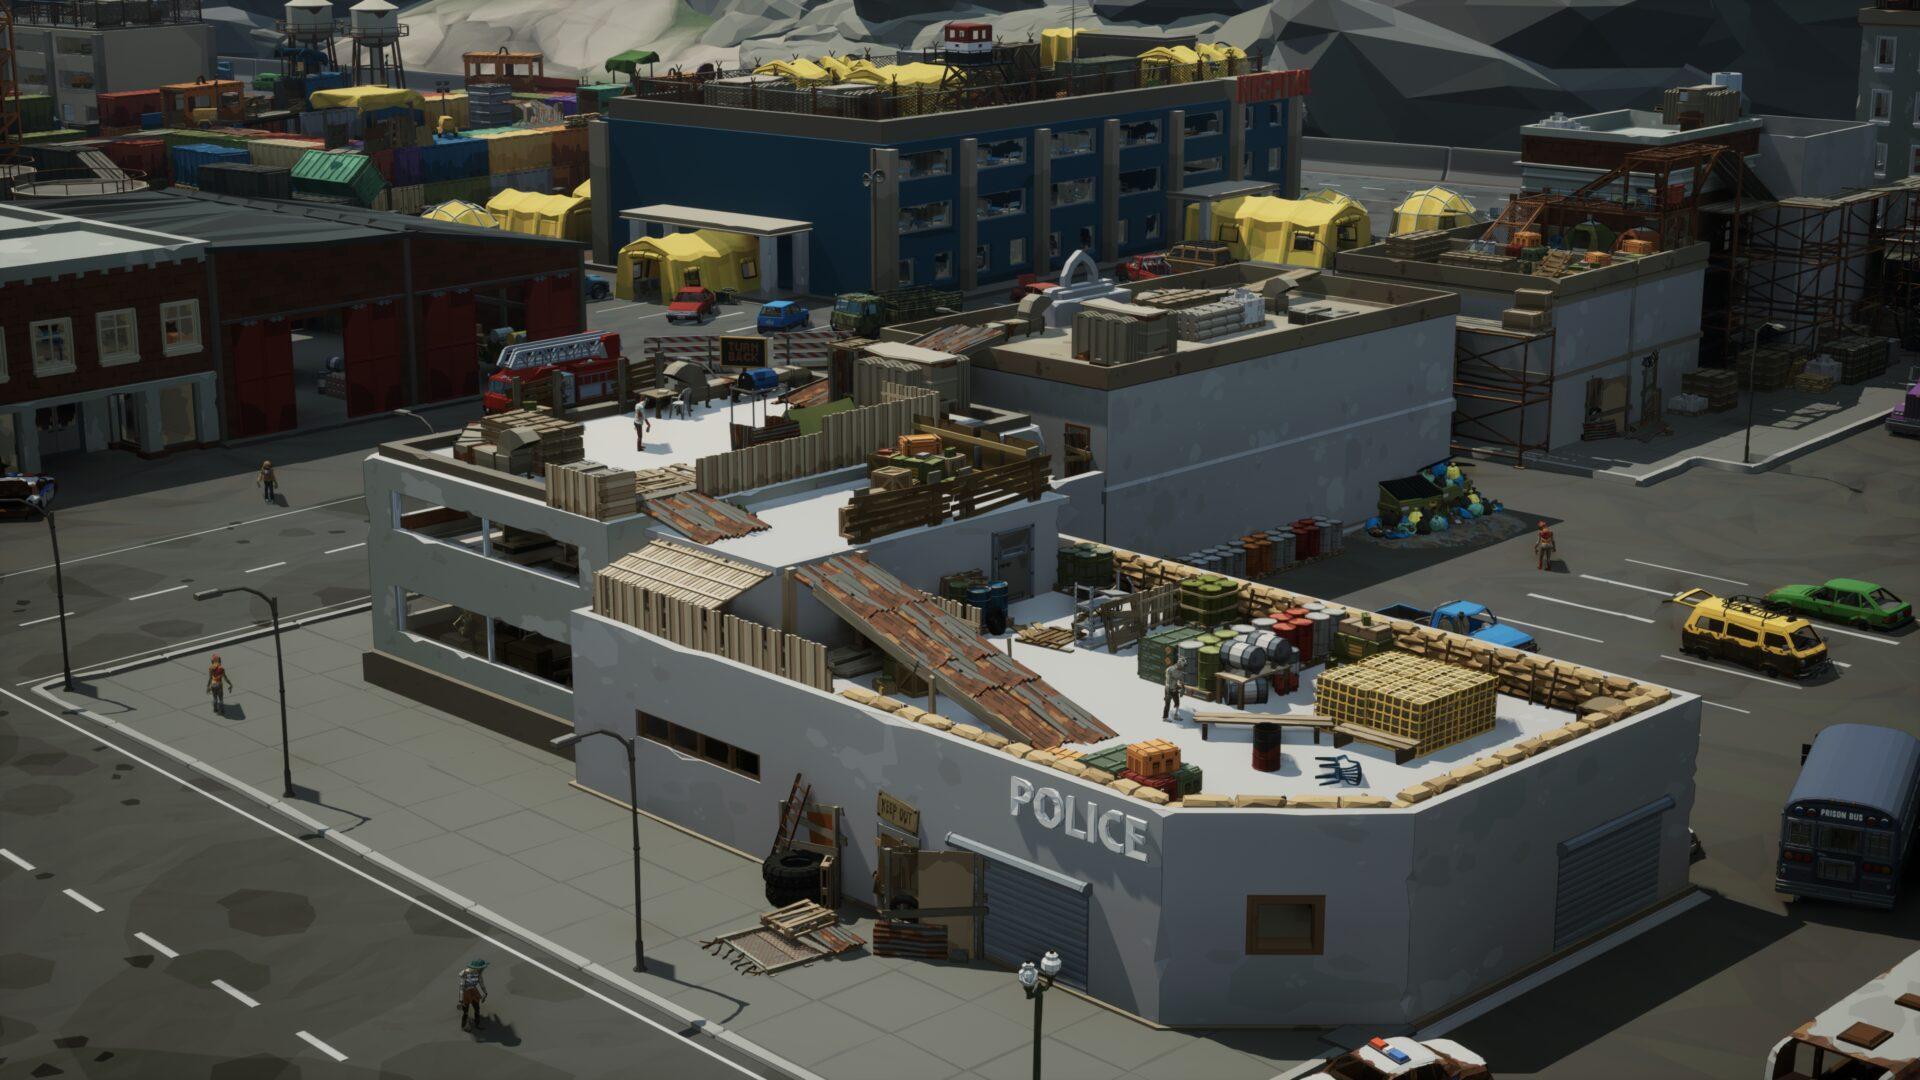 Overview shot of the police station in the coastal city.